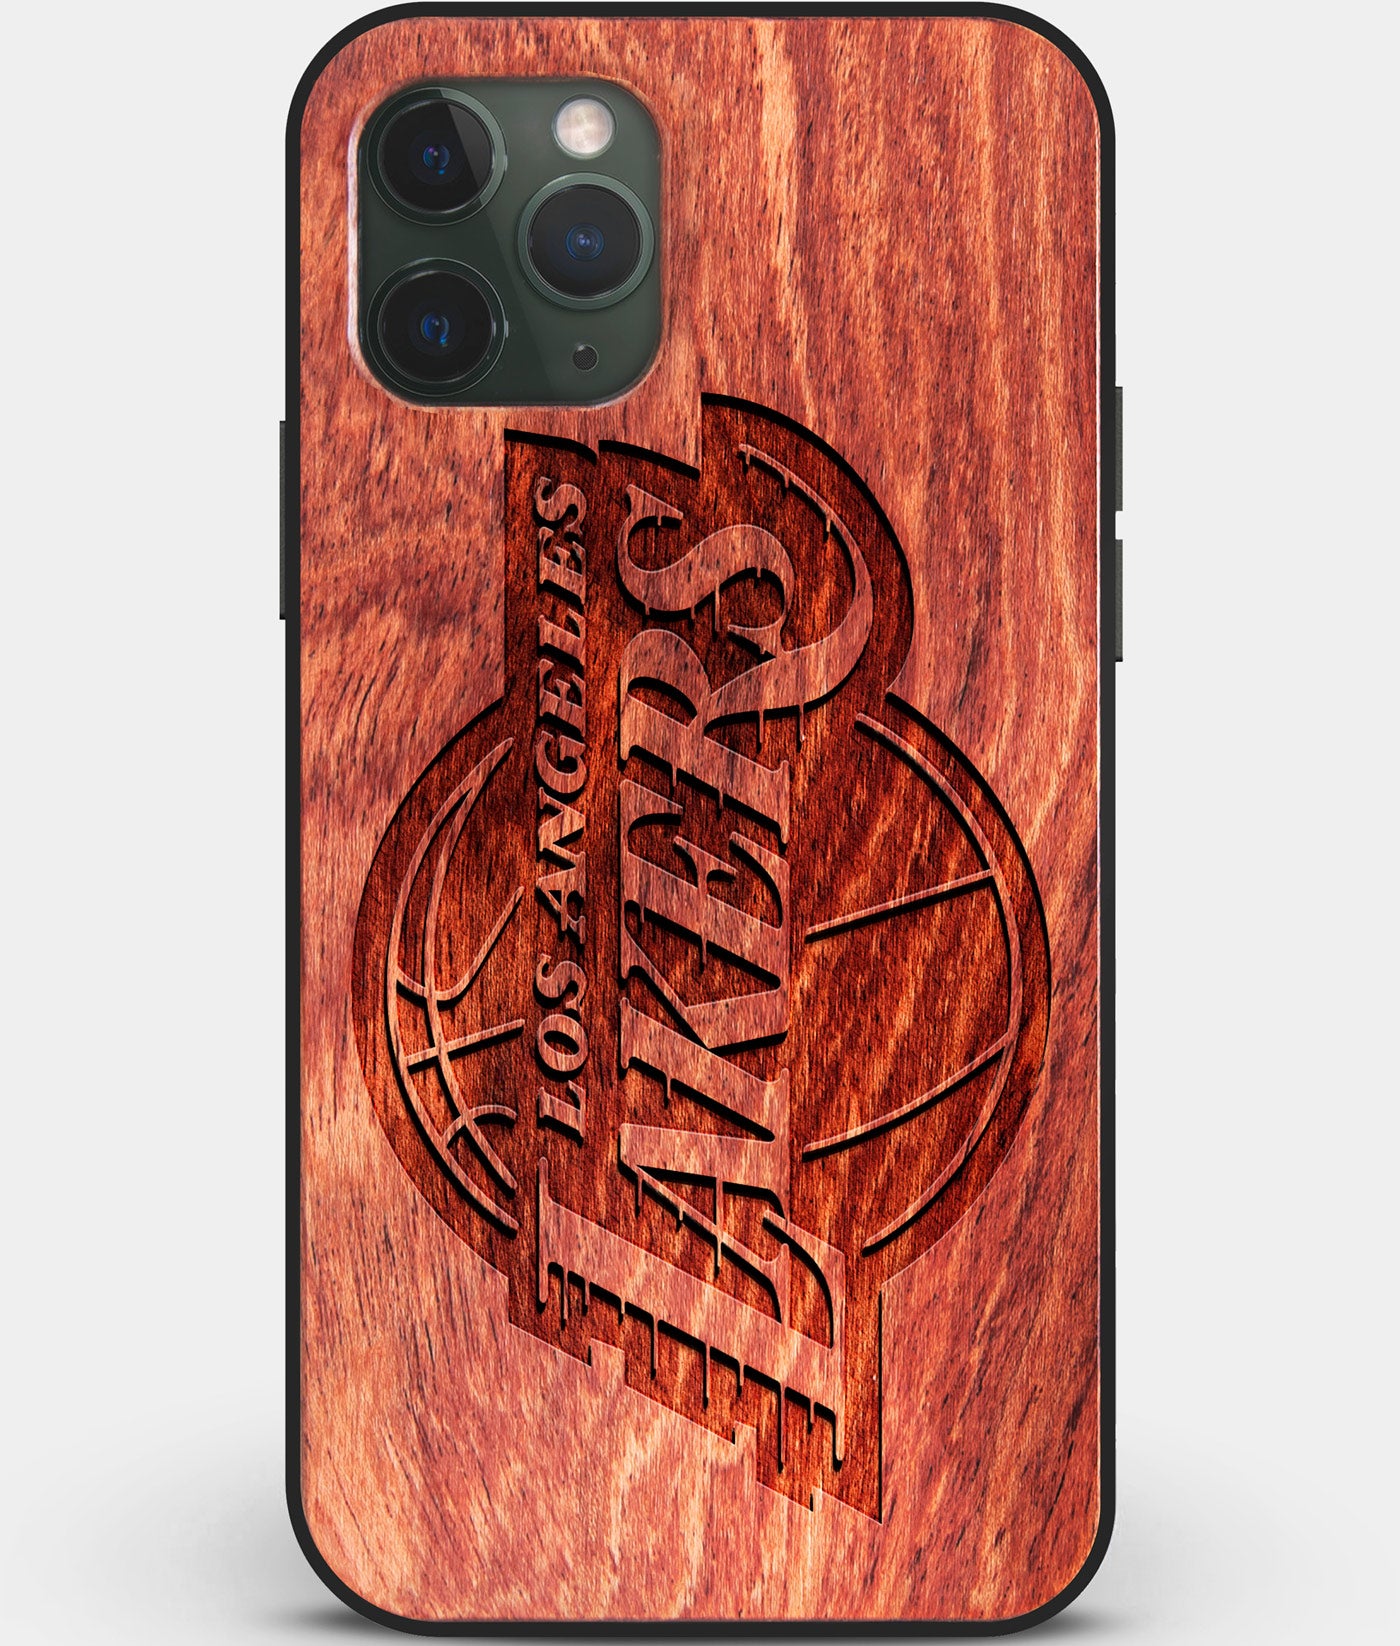 Custom Carved Wood Los Angeles Lakers iPhone 11 Pro Max Case | Personalized Mahogany Wood Los Angeles Lakers Cover, Birthday Gift, Gifts For Him, Monogrammed Gift For Fan | by Engraved In Nature